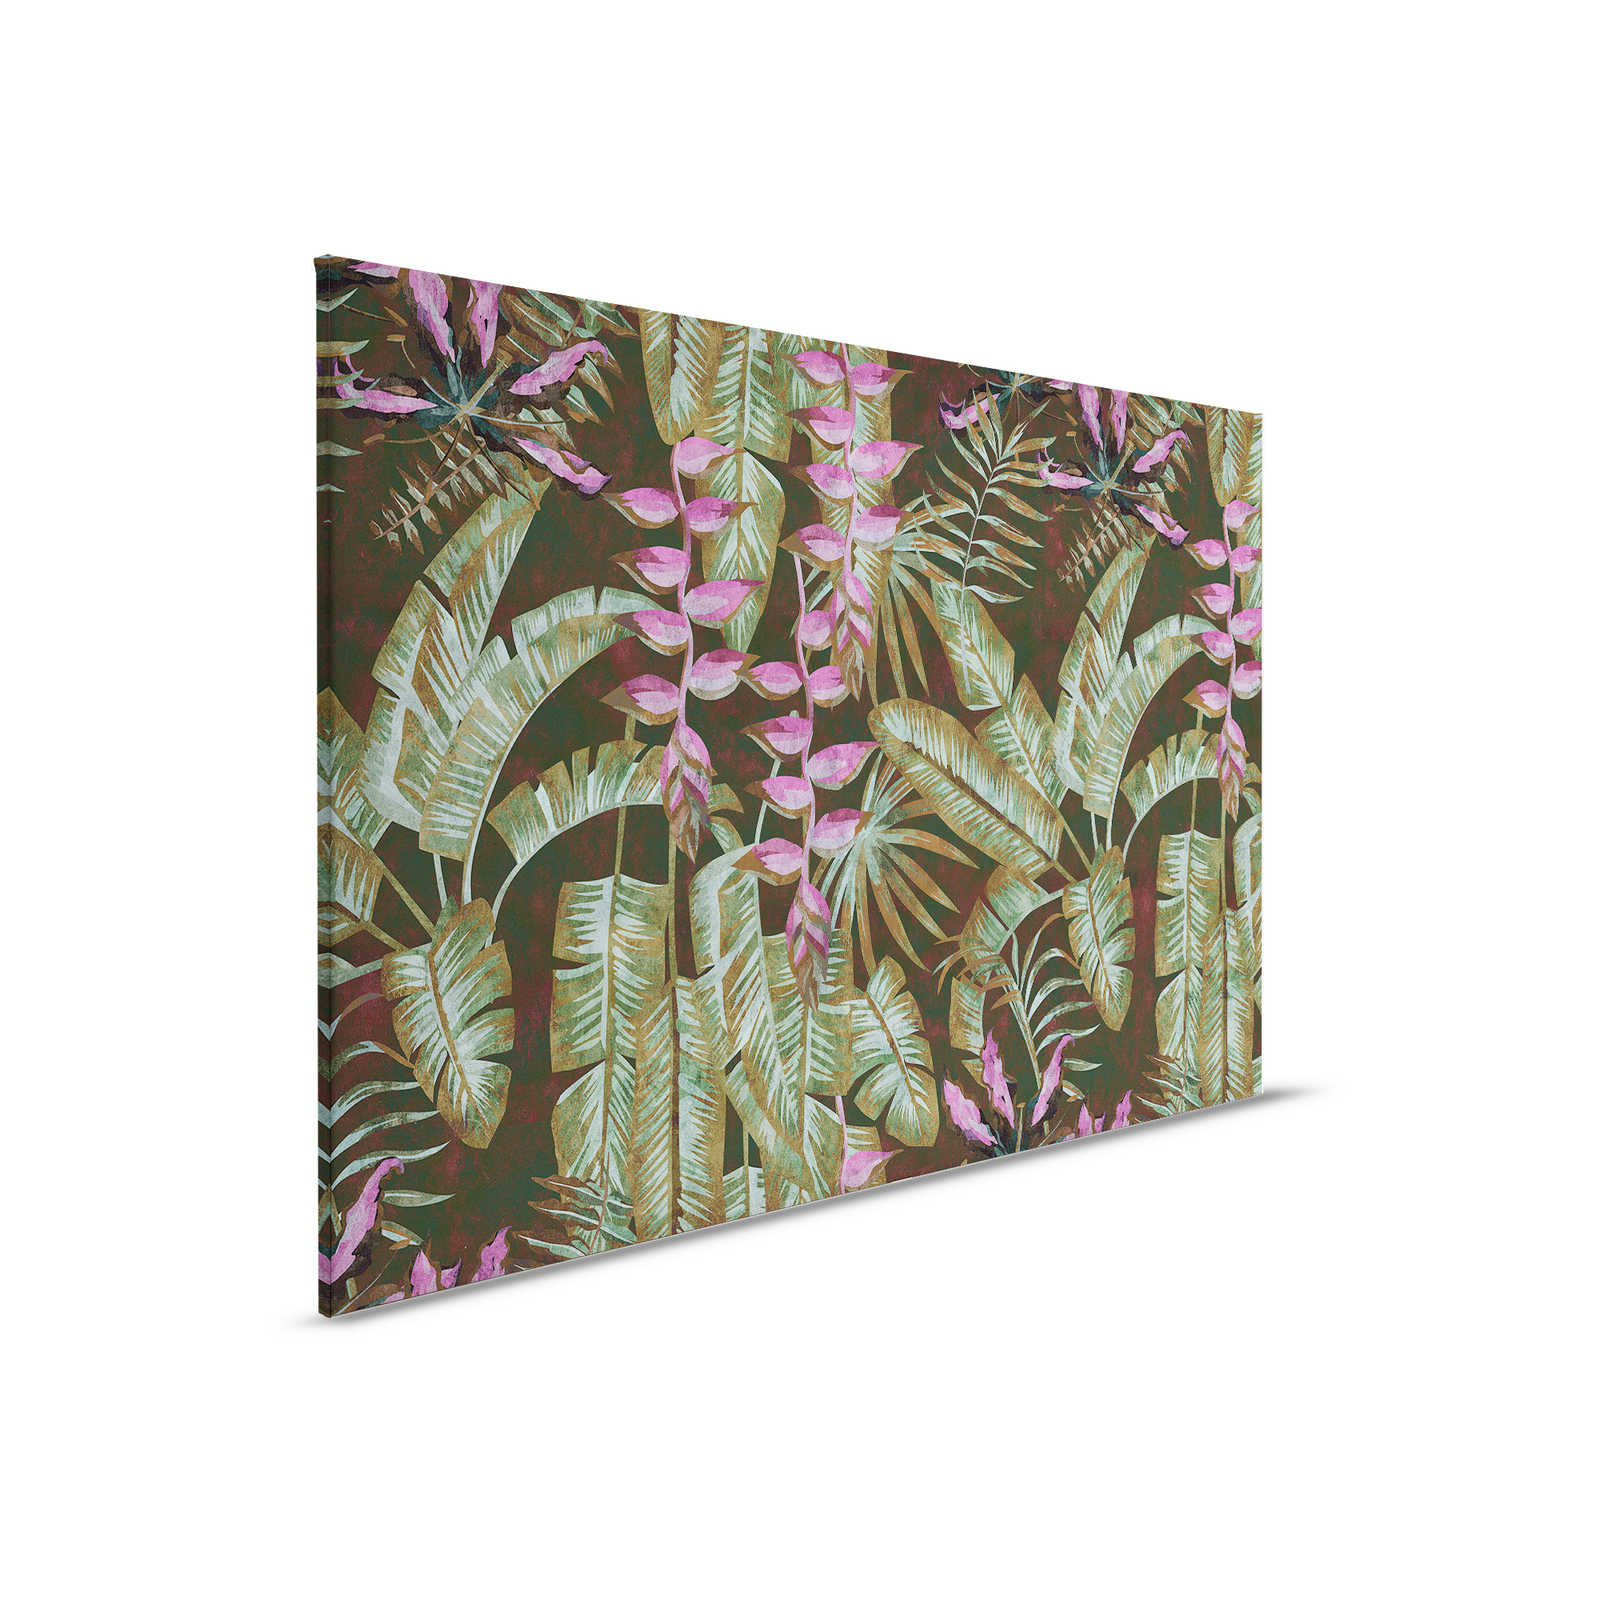 Tropicana 1 - Jungle Canvas Painting with Banana Leaves & Ferns - 0.90 m x 0.60 m
